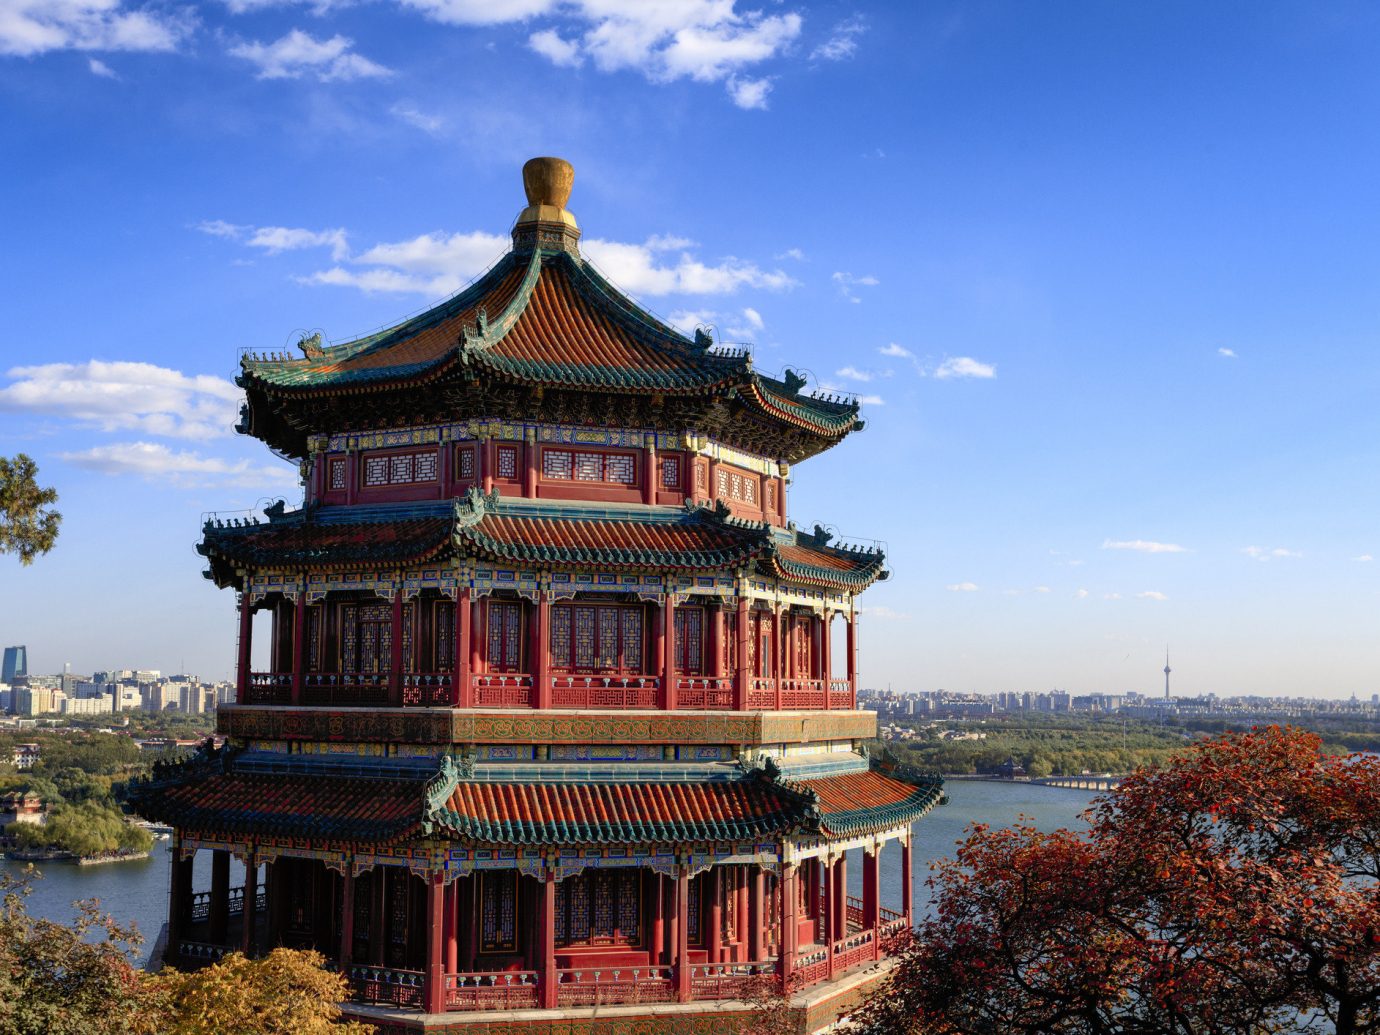 Trip Ideas sky outdoor chinese architecture building landmark historic site place of worship tower temple tourism palace pagoda